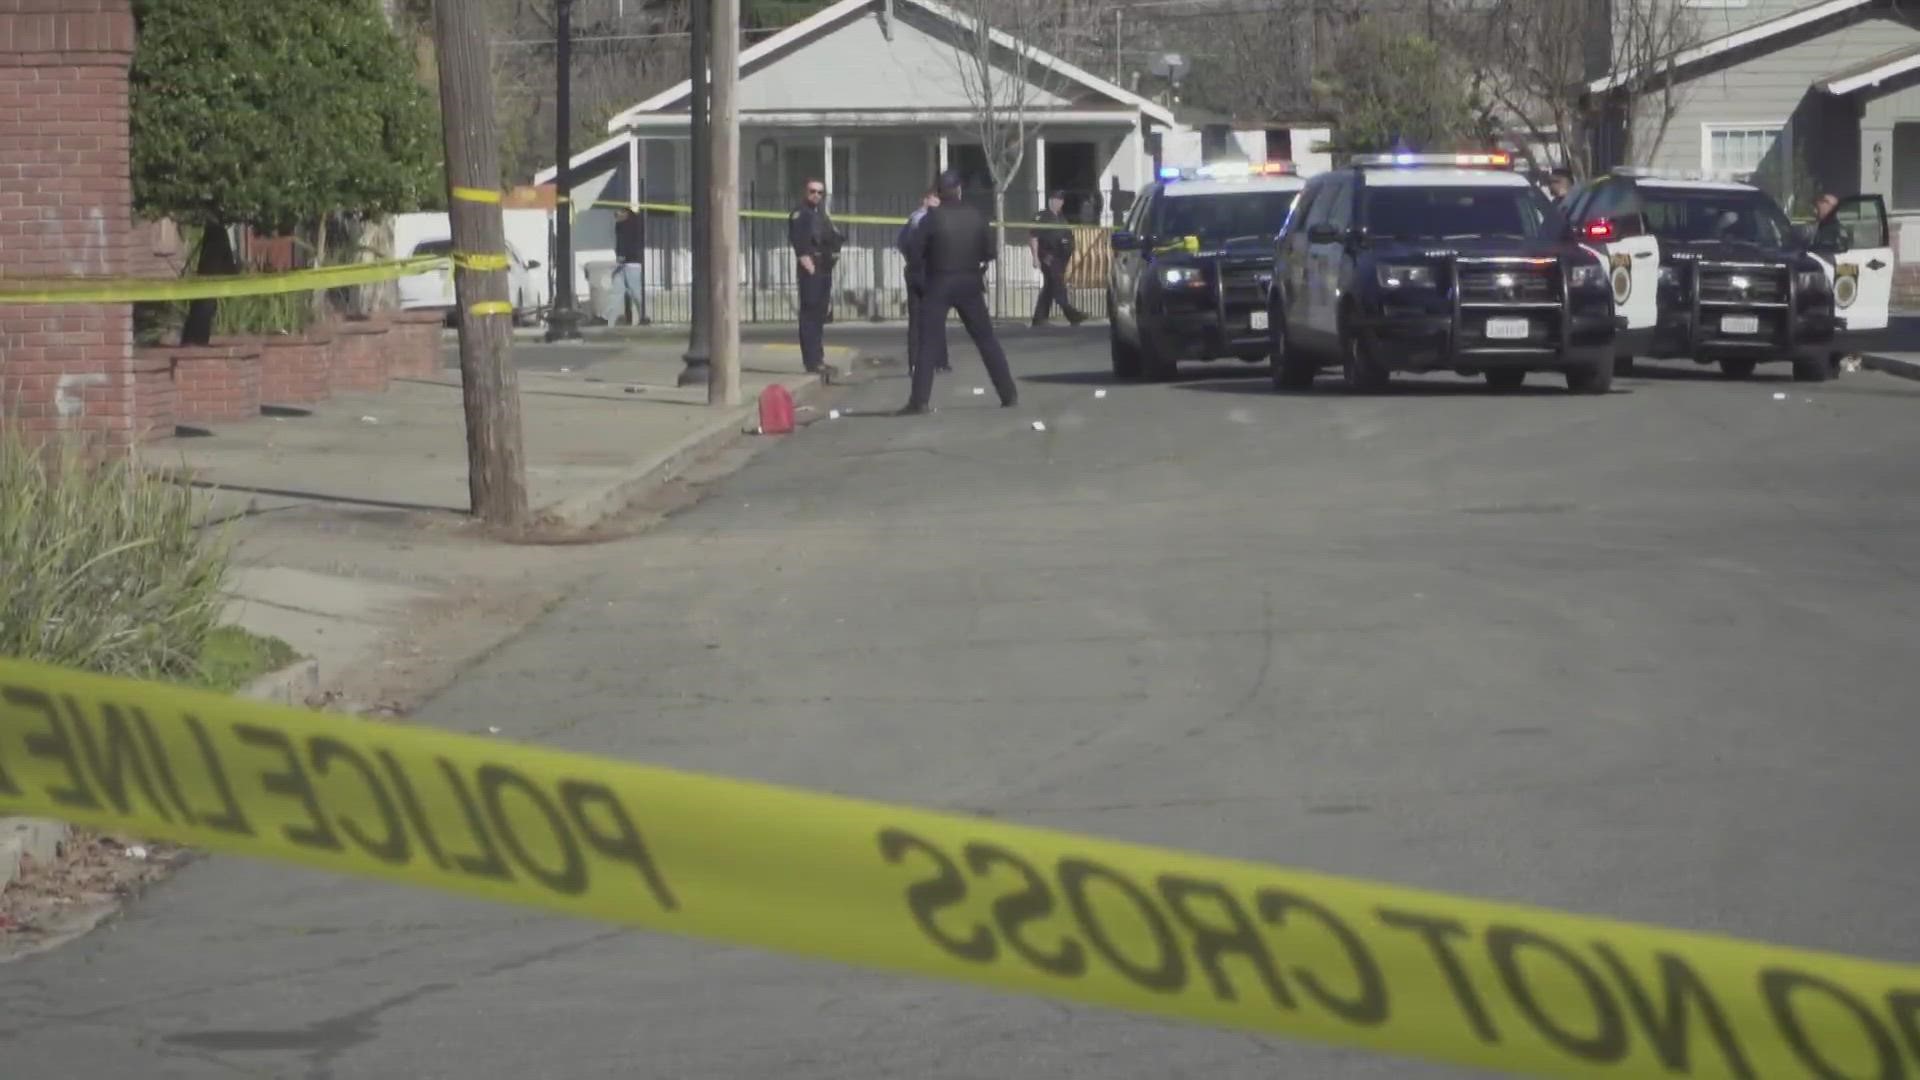 The shooting happened near El Camino Ave and Cantalier Street, according to the Sacramento Police Department.